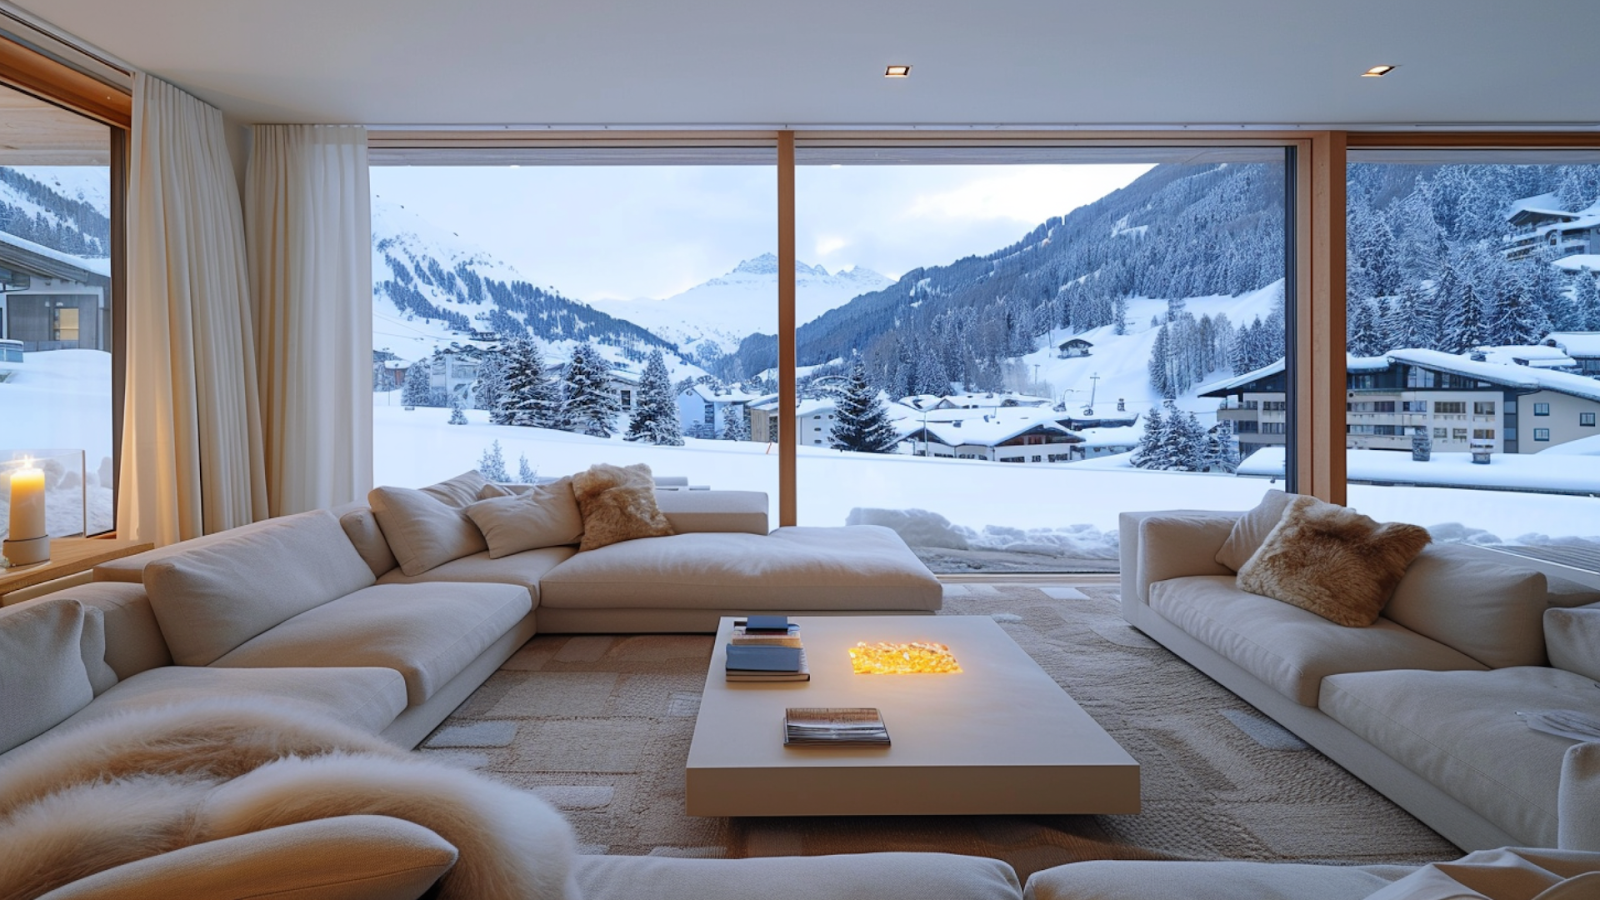 A spacious living room of a luxury vacation rental in Davos, Switzerland